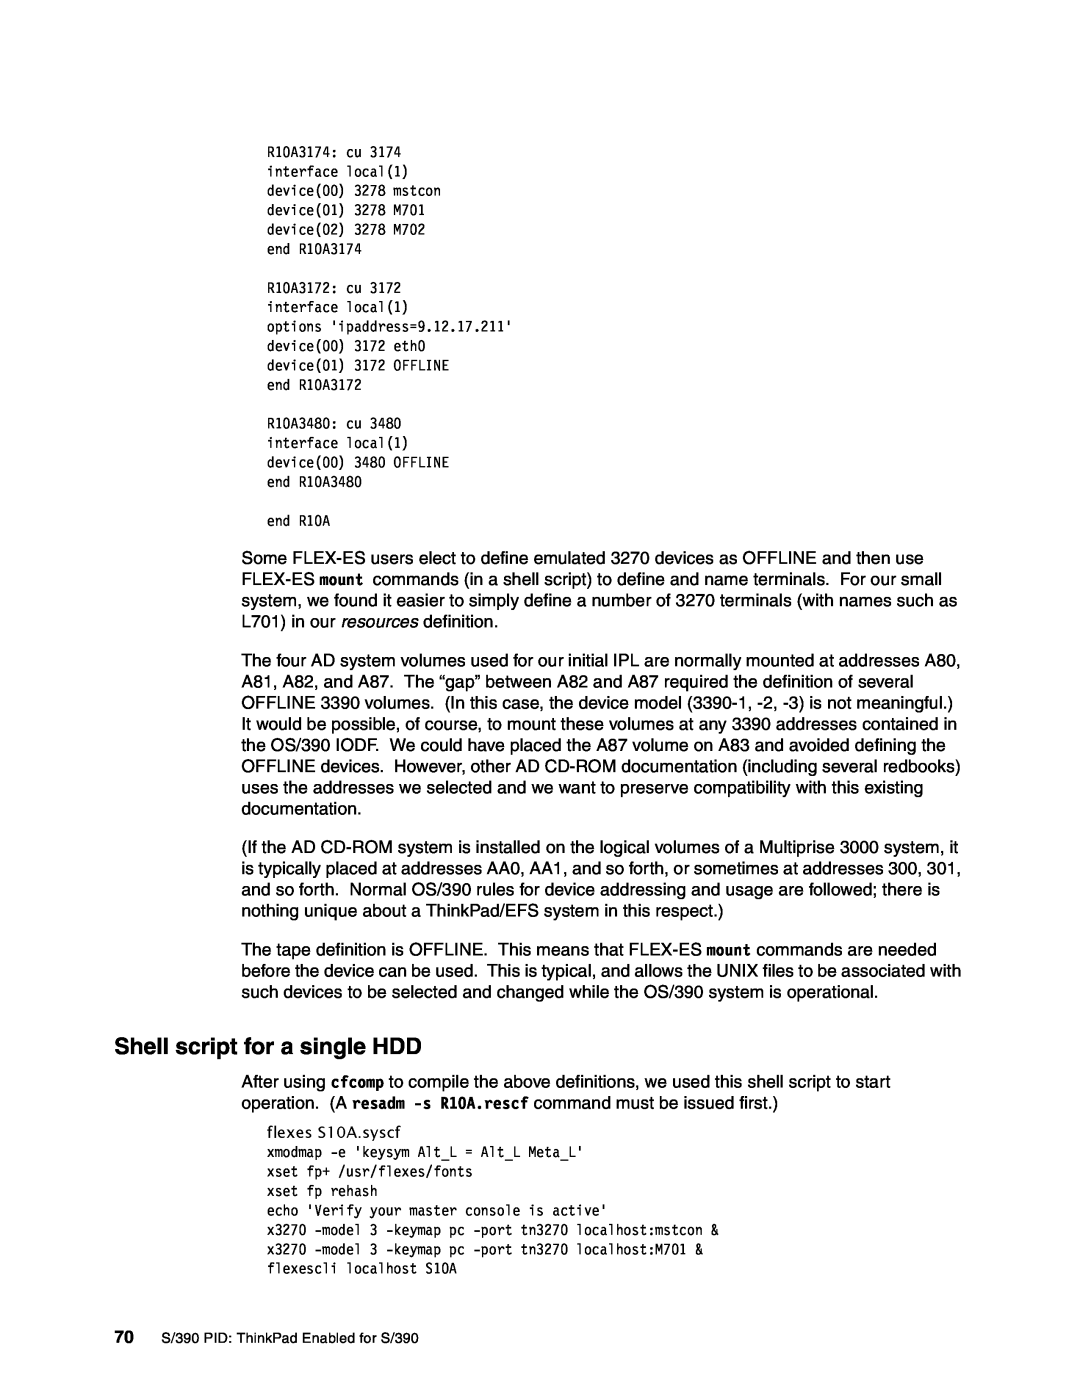 IBM s/390 manual Shell script for a single HDD, 70 S/390 PID ThinkPad Enabled for S/390 